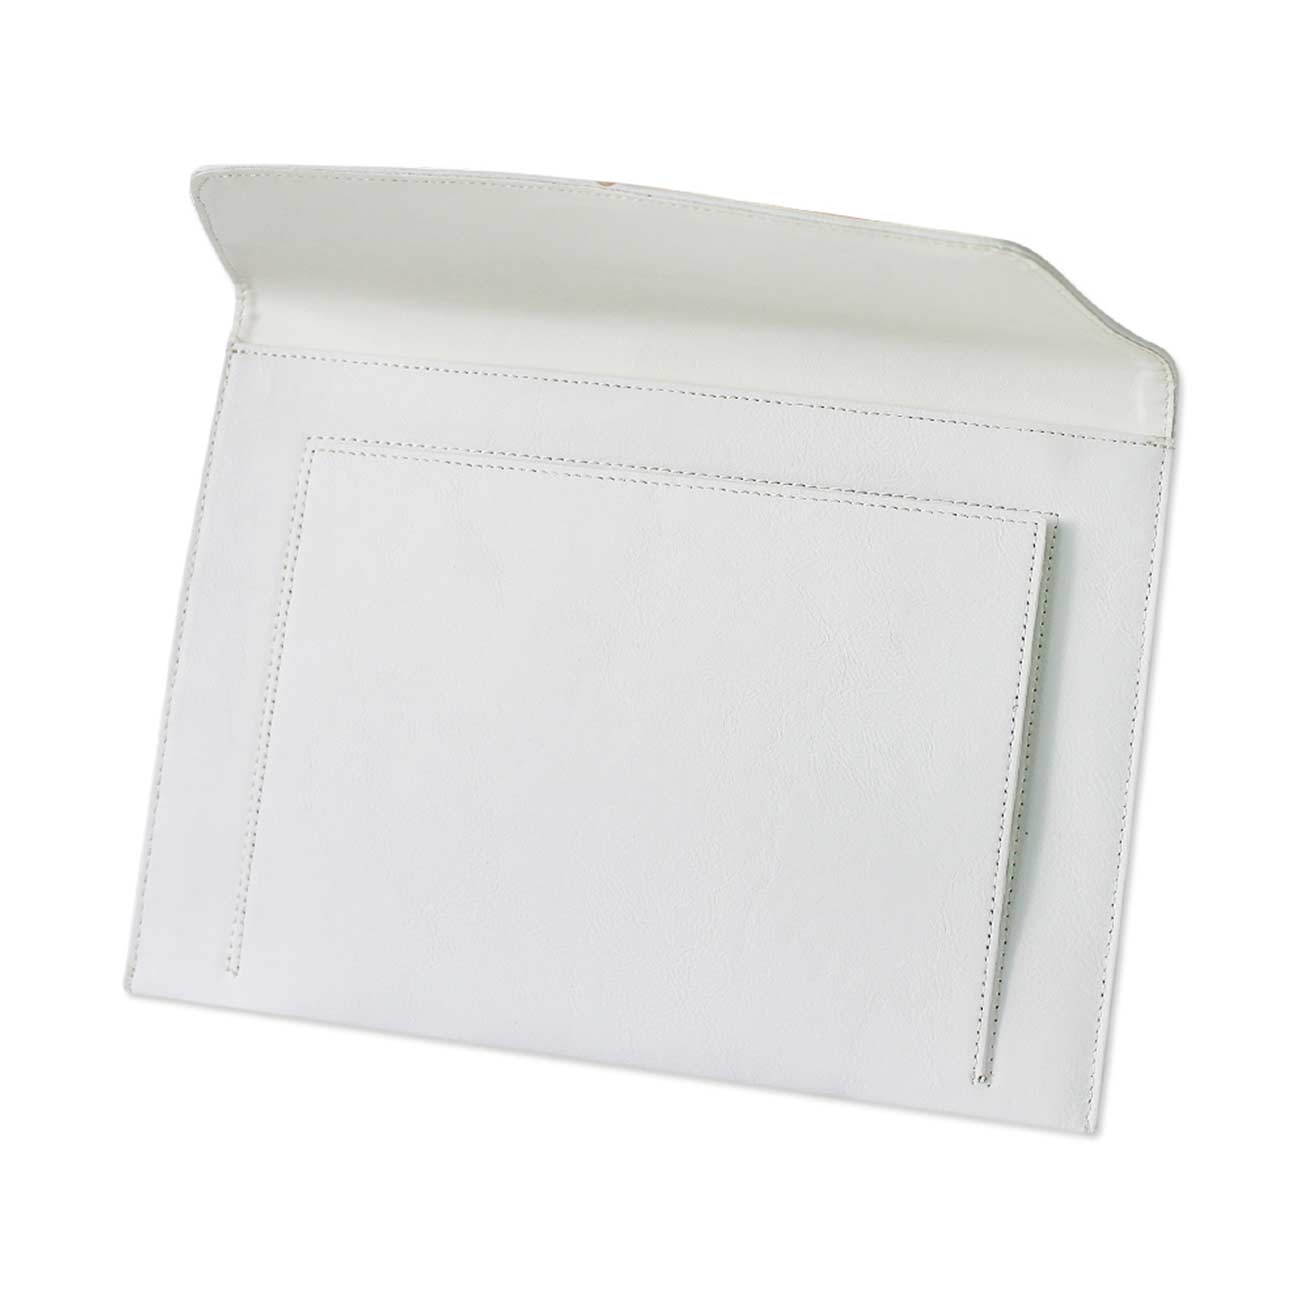 PREMIUM LEATHER CASE POUCH FOR 8.2INCHES IPADS AND TABLETS In WHITE